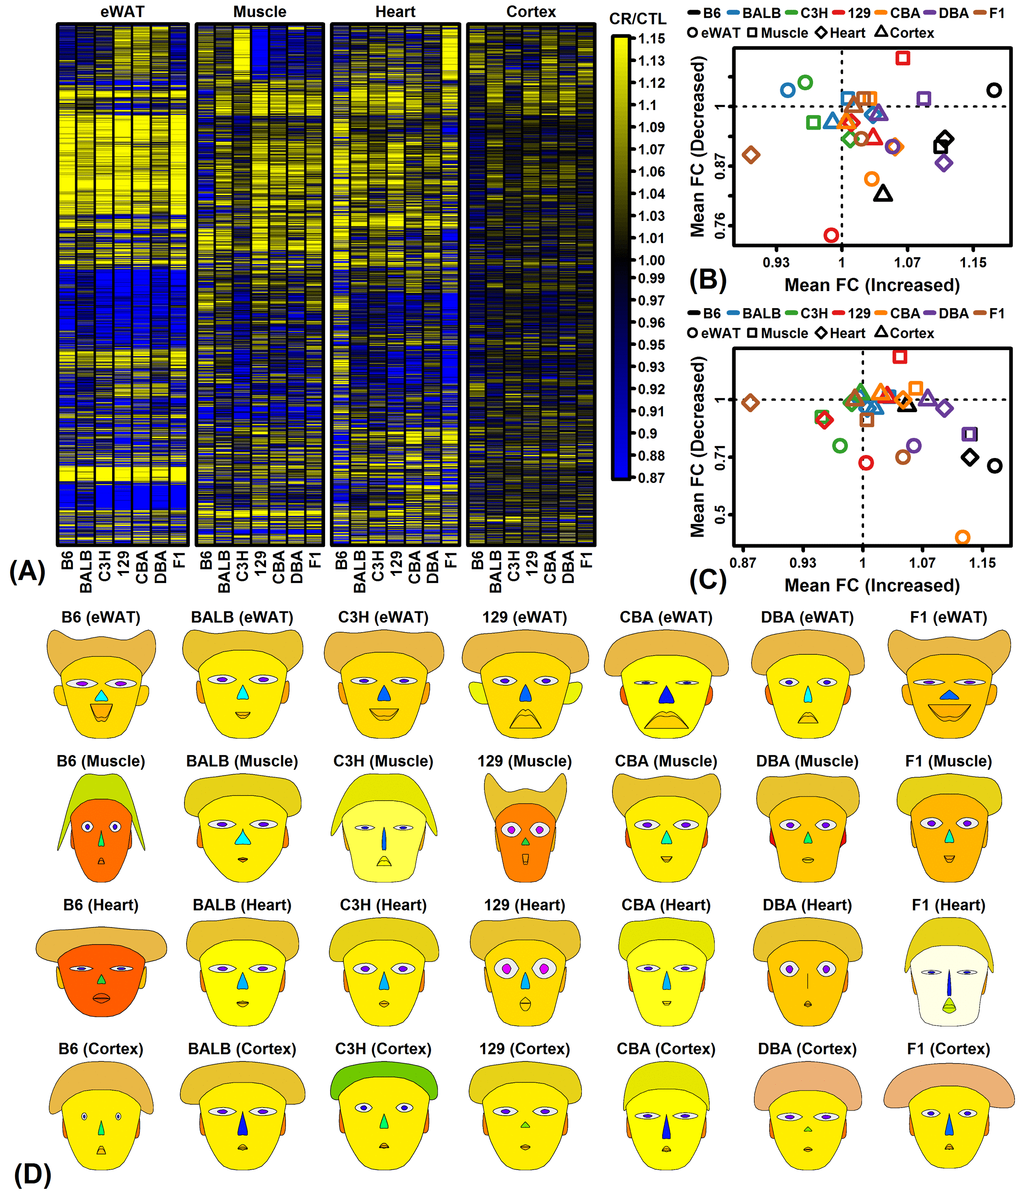 CR response comparison (28 strain-tissue combinations). (A) FC heatmap with hierarchical clustering. The heatmap shows CR responses among 6564 protein-coding genes with detectable expression in all strains and all 4 tissues. Genes were filtered to exclude those weakly altered by CR. Genes were clustered using the average linkage and Euclidean distance. (B) CR meta-analysis gene signature (Plank et al. 2012, Mol Biosyst 8:1339-1349). (C) CR meta-analysis gene signature (Swindell 2009, BMC Genomics 10:585). In (B) and (C), average FC is plotted for CR-increased genes (horizontal axis) and CR-decreased genes (vertical axis) identified from meta-analyses of microarray studies of CR response in rodents. Signatures are calculated from (B) 37 CR-increased and 37 CR-decreased genes or (C) 40 CR-increased and 40 CR-decreased genes. (D) Chernoff faces. A set of 15 principal component (PC) scores was extracted from the matrix of FC estimates for all protein-coding genes and 28 strain-tissue combinations. The Chernoff face features each correspond to one of the 15 PC scores such that more similar faces indicate more similar CR expression responses.